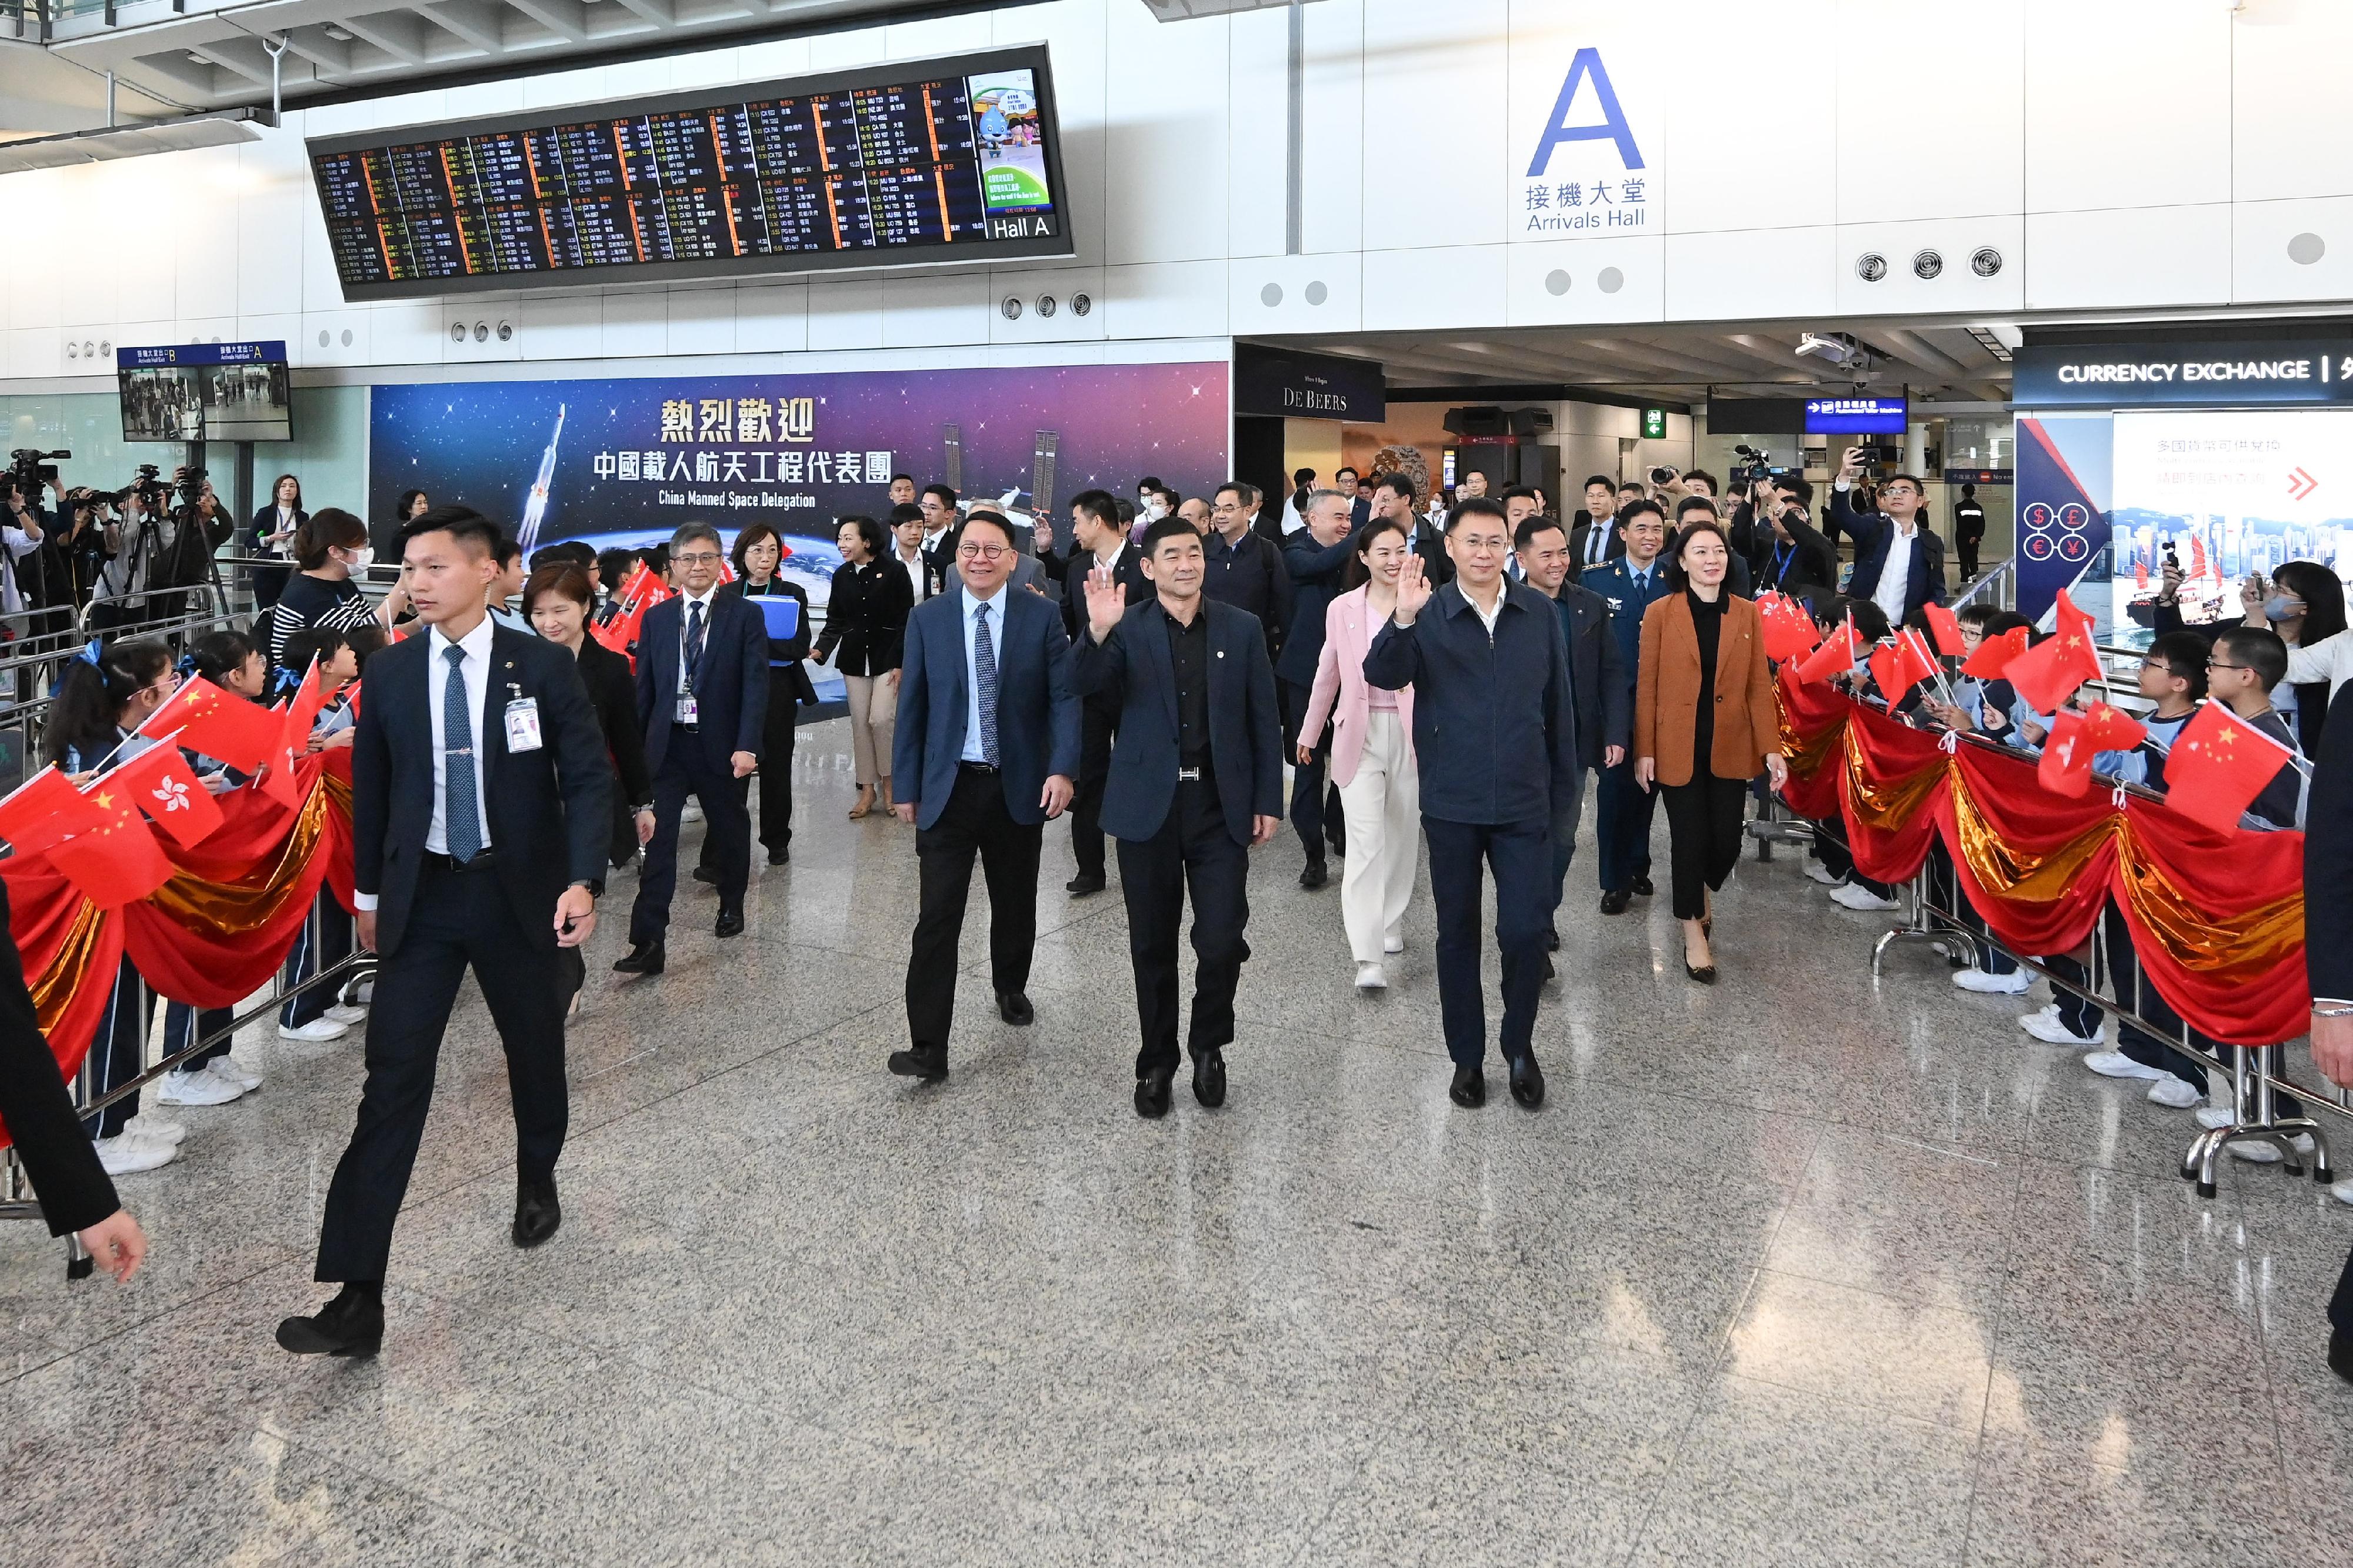 A China Manned Space delegation arrived in Hong Kong for a four-day visit today (November 28). Photo shows the Chief Secretary for Administration, Mr Chan Kwok-ki (sixth right), greeting the delegation members at Hong Kong International Airport.